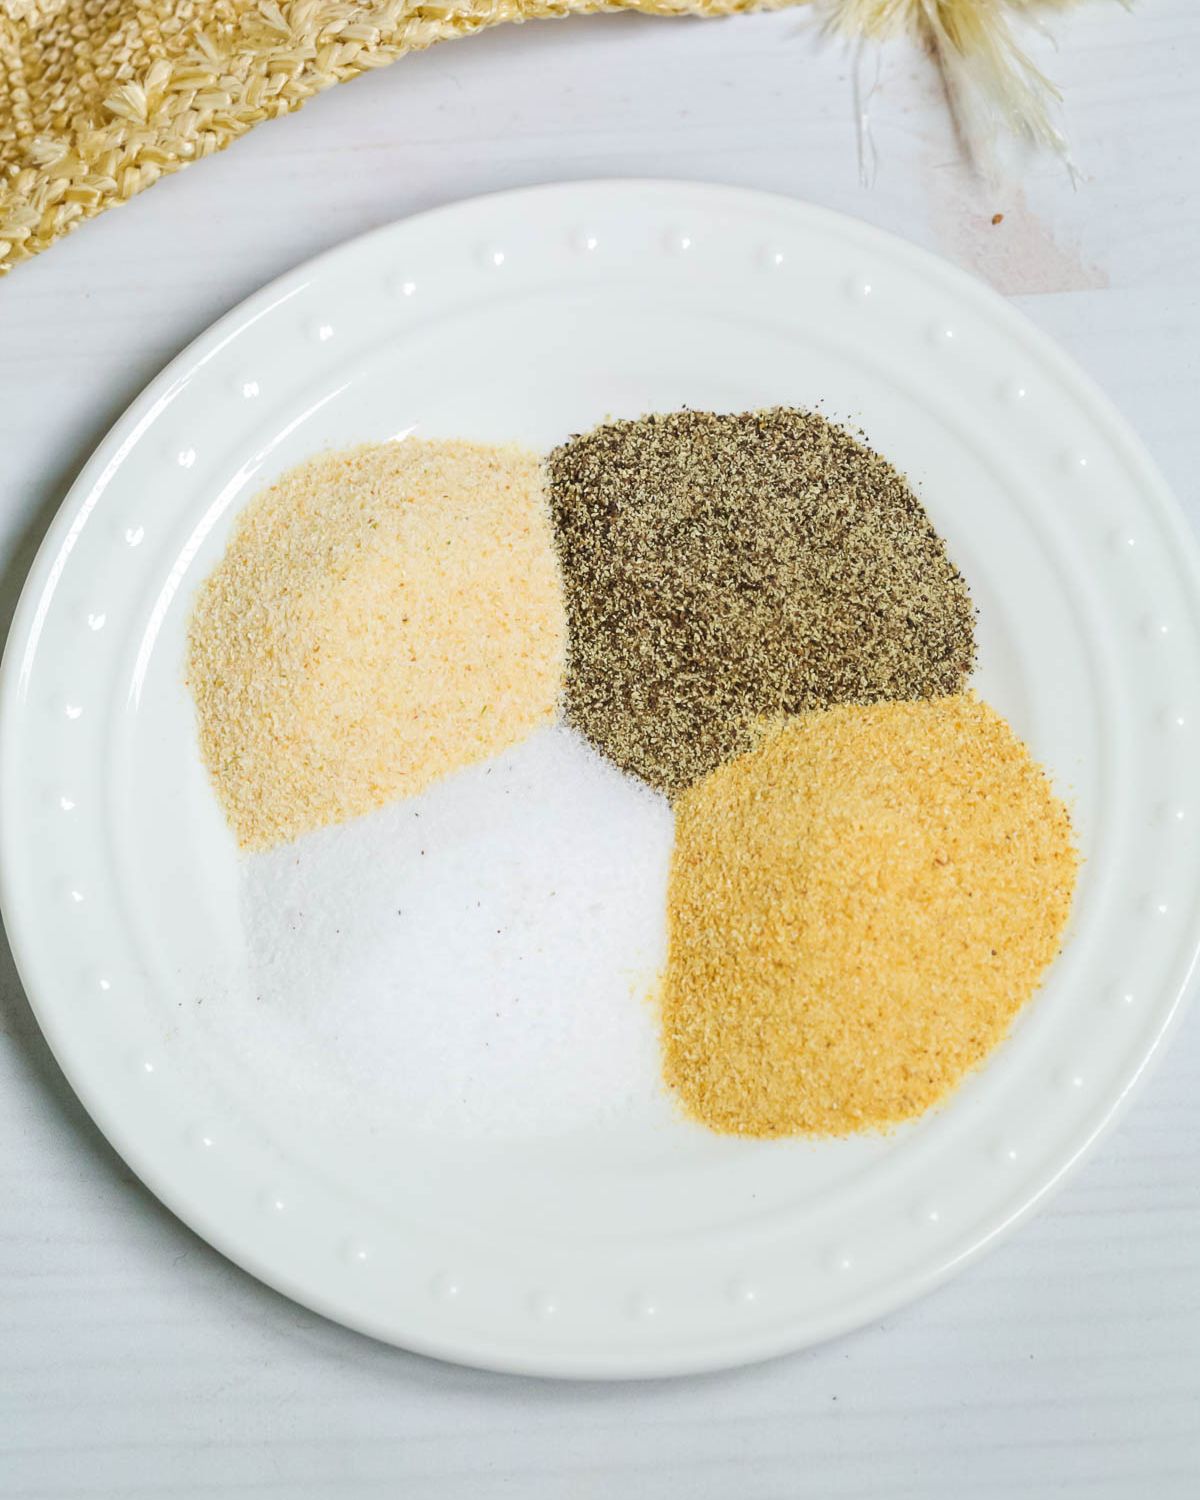 Ingredients for all-purpose seasoning on a plate